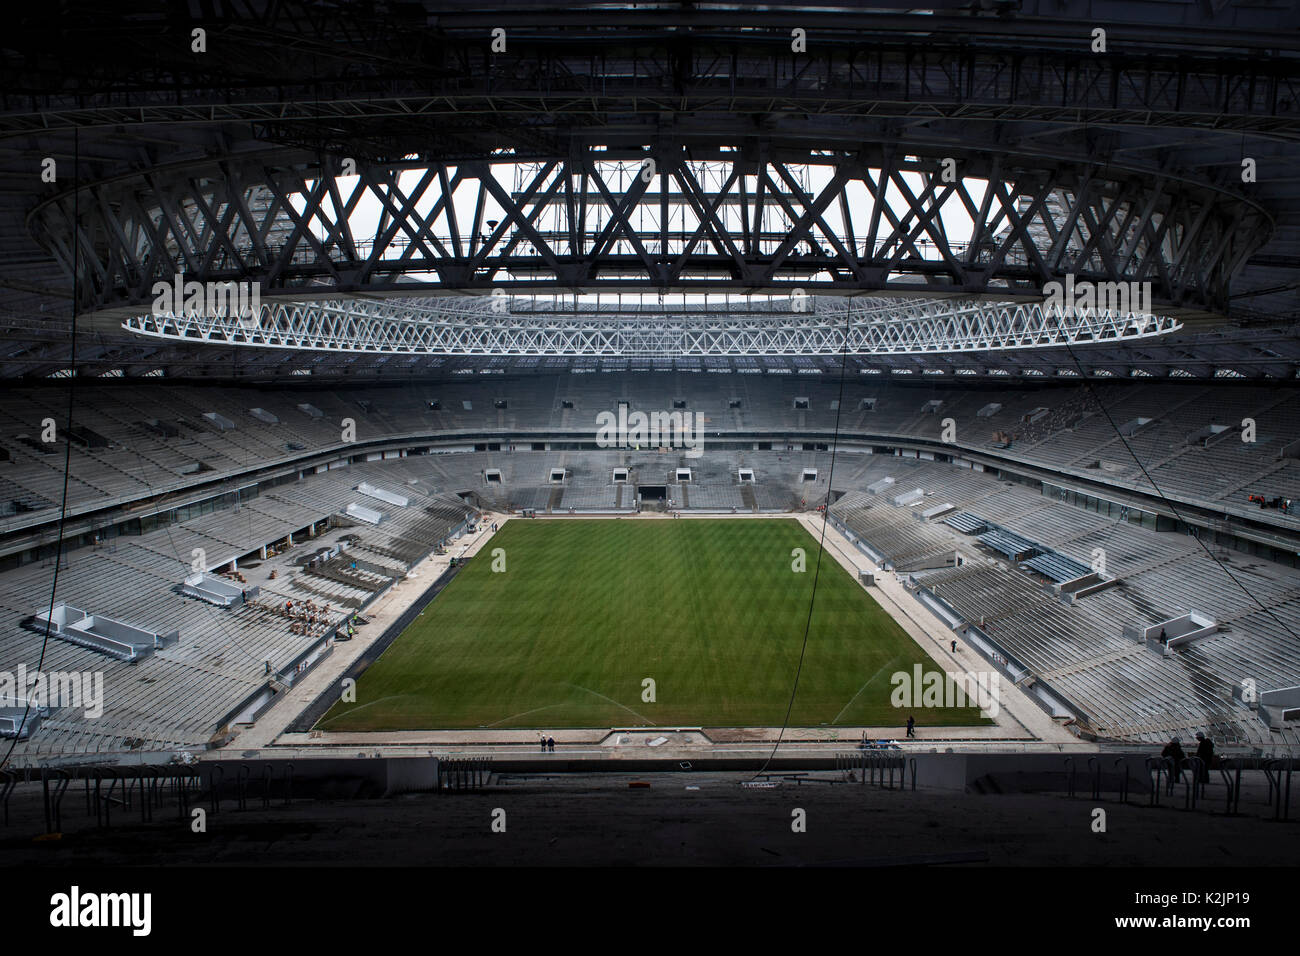 Renovation of the Luzhniki Stadium in Moscow. It will host the World Cup final and has a capacity of 80,000 people. Construction and renovation of football stadiums in Russia is racing against time as Russia is set to host the FIFA 2018 World Cup during June and July 2018. Stock Photo